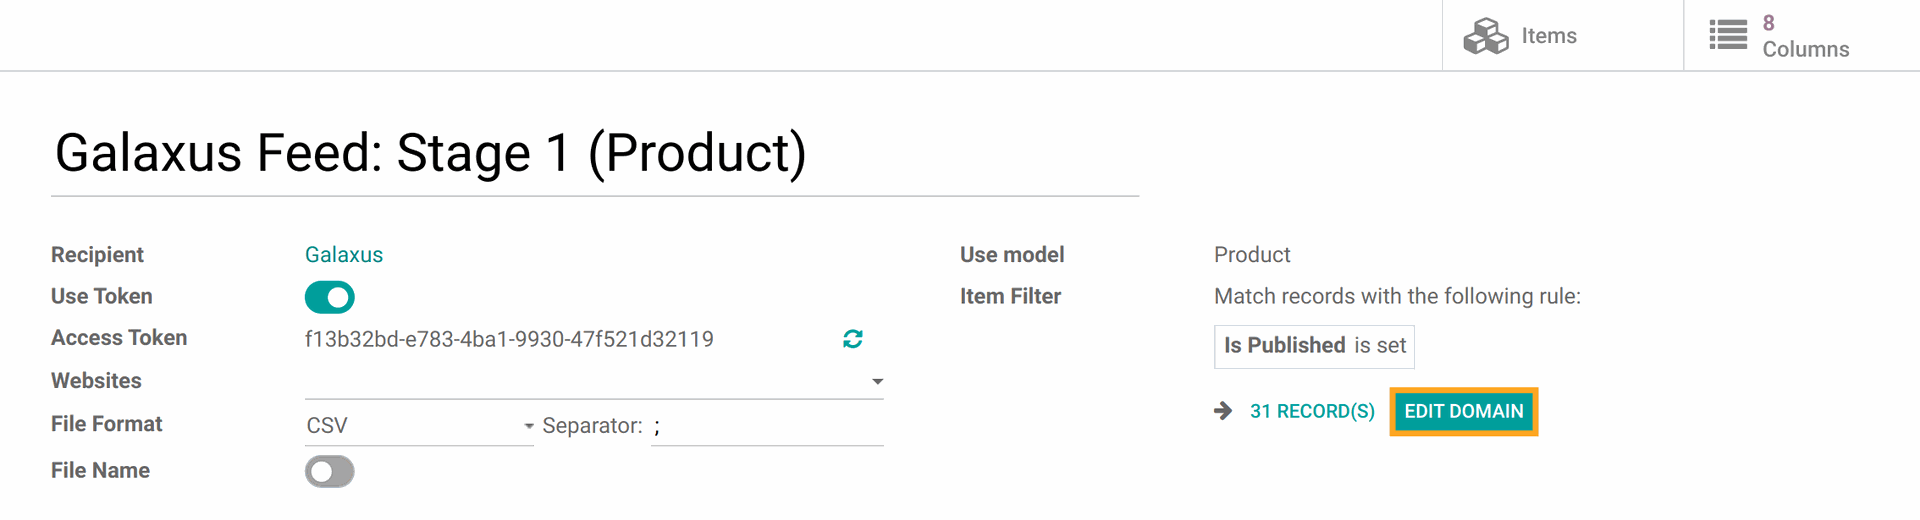 Odoo Digitec Galaxus adding product to a feed 16.0